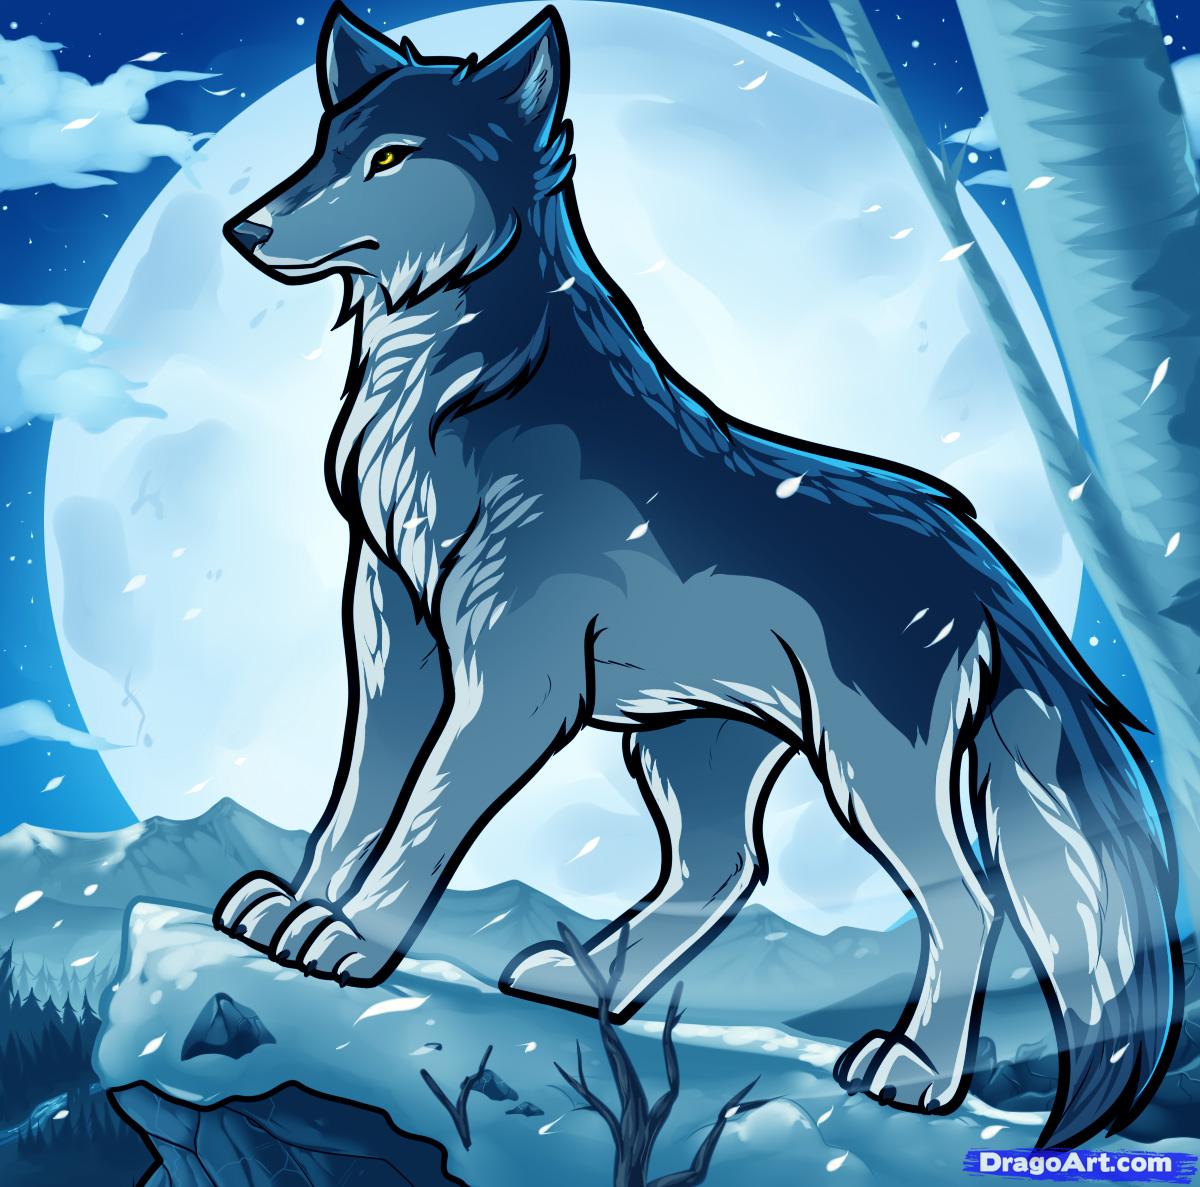 How to Draw Anime Wolves, Anime Wolves, Step by Step, anime ...